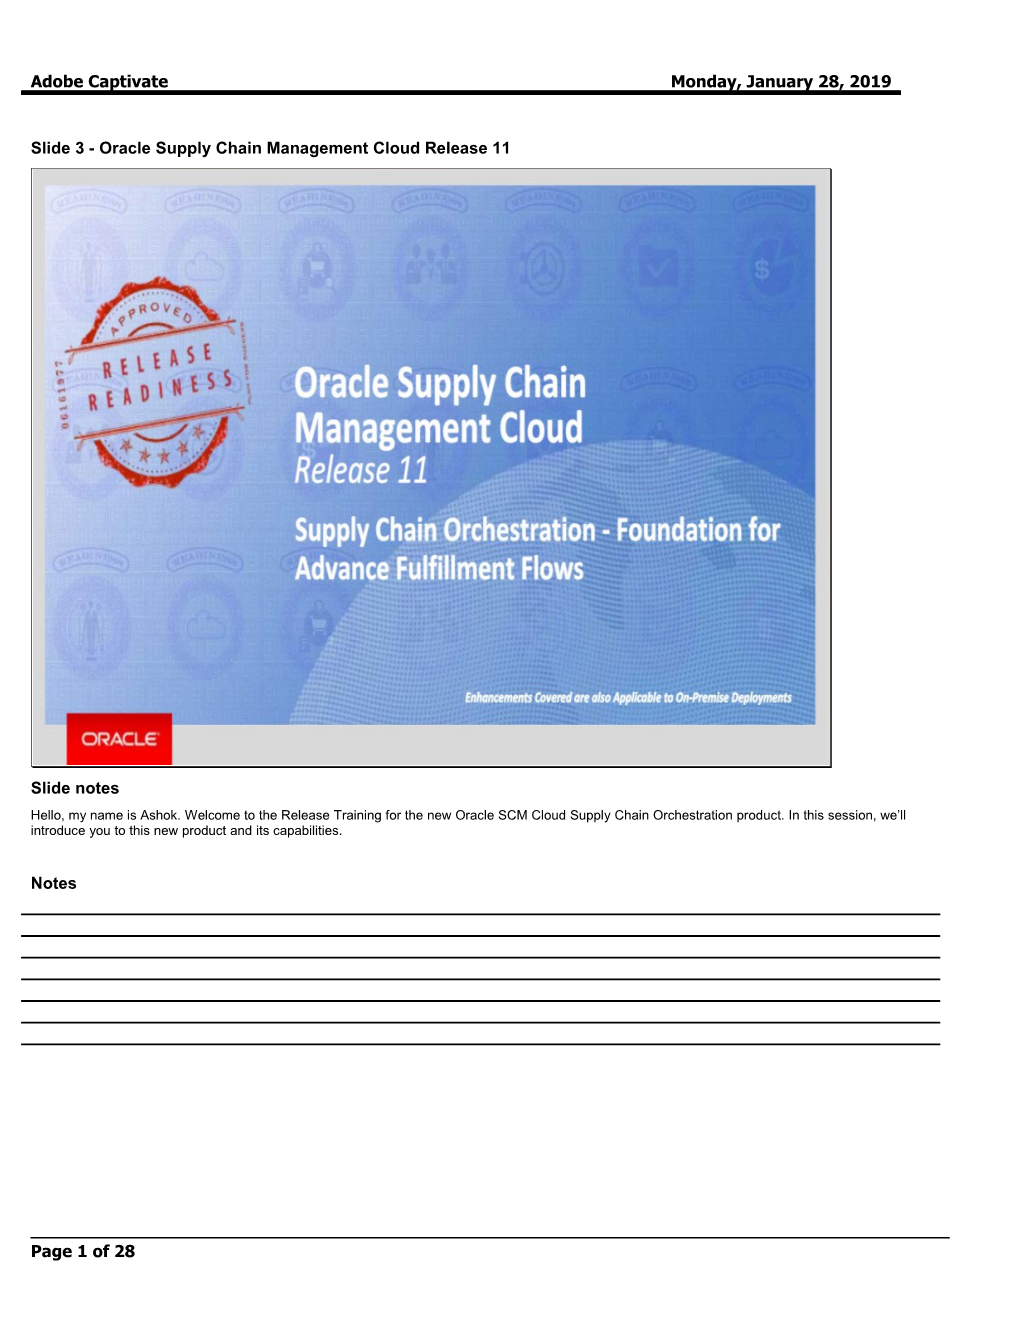 Slide 3 - Oracle Supply Chain Management Cloud Release 11